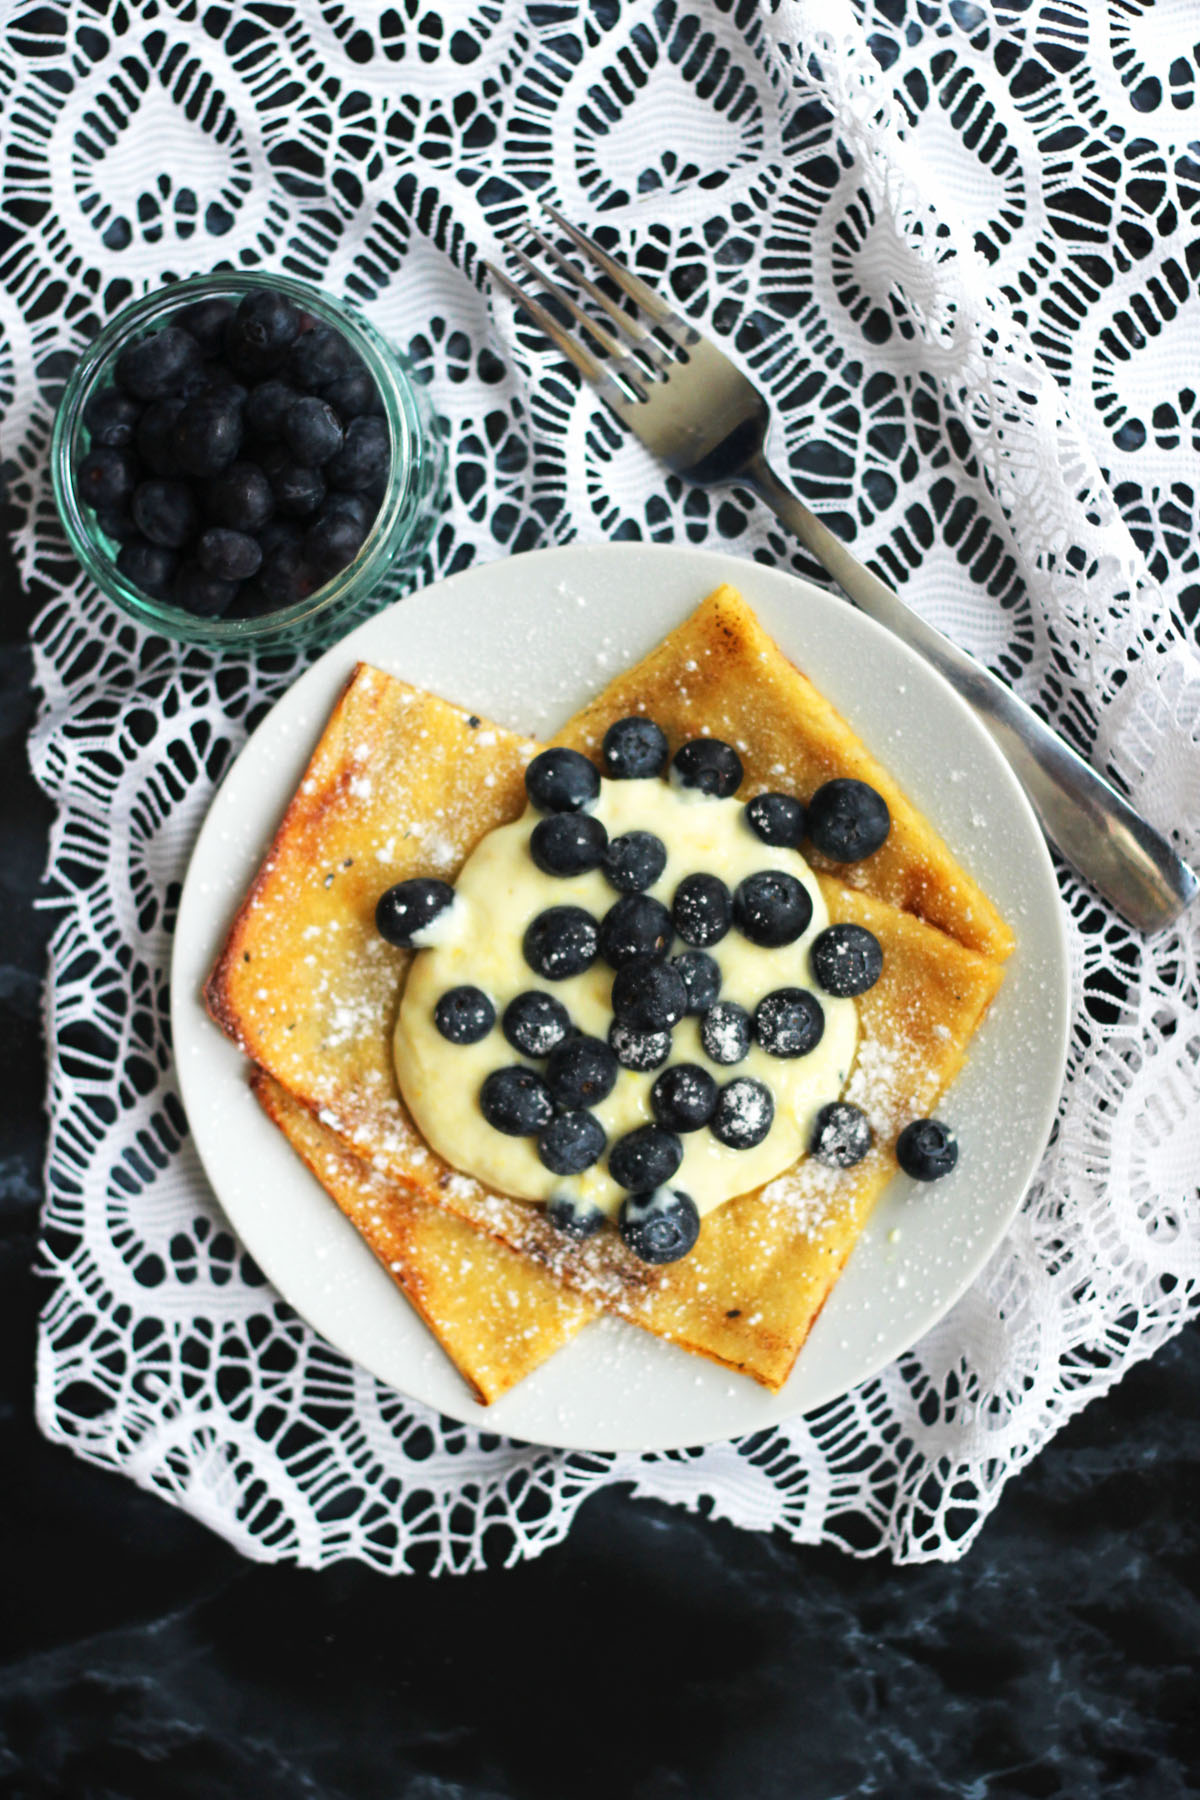 Oven Baked Pancakes are a delicious alternative to crepes and American style pancakes this Shrove Tuesday find the recipe at Supper in the Suburbs